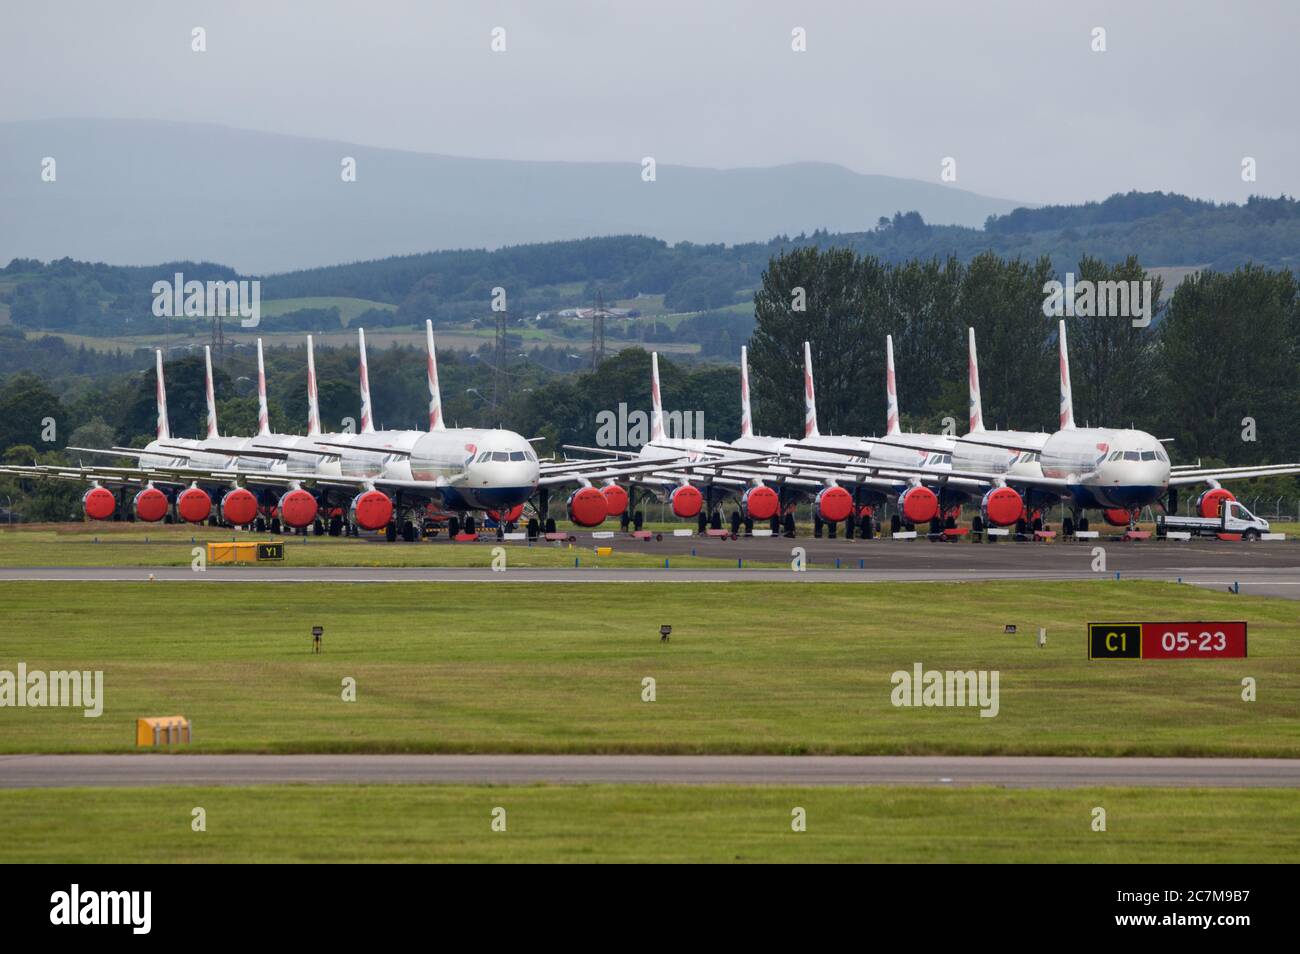 Glasgow, Scotland, UK. 17 July 2020. Pictured:  Grounded British Airways Airbus A319/A320/A321 aircraft form the backdrop showing how bad the coronavirus (COVID19) crisis has affected the global airline industry.  British Airways today axed all of its Boeing 747 services cutting back and have already axed a quarter of its staff due to the pandemic. Credit: Colin Fisher/Alamy Live News. Stock Photo